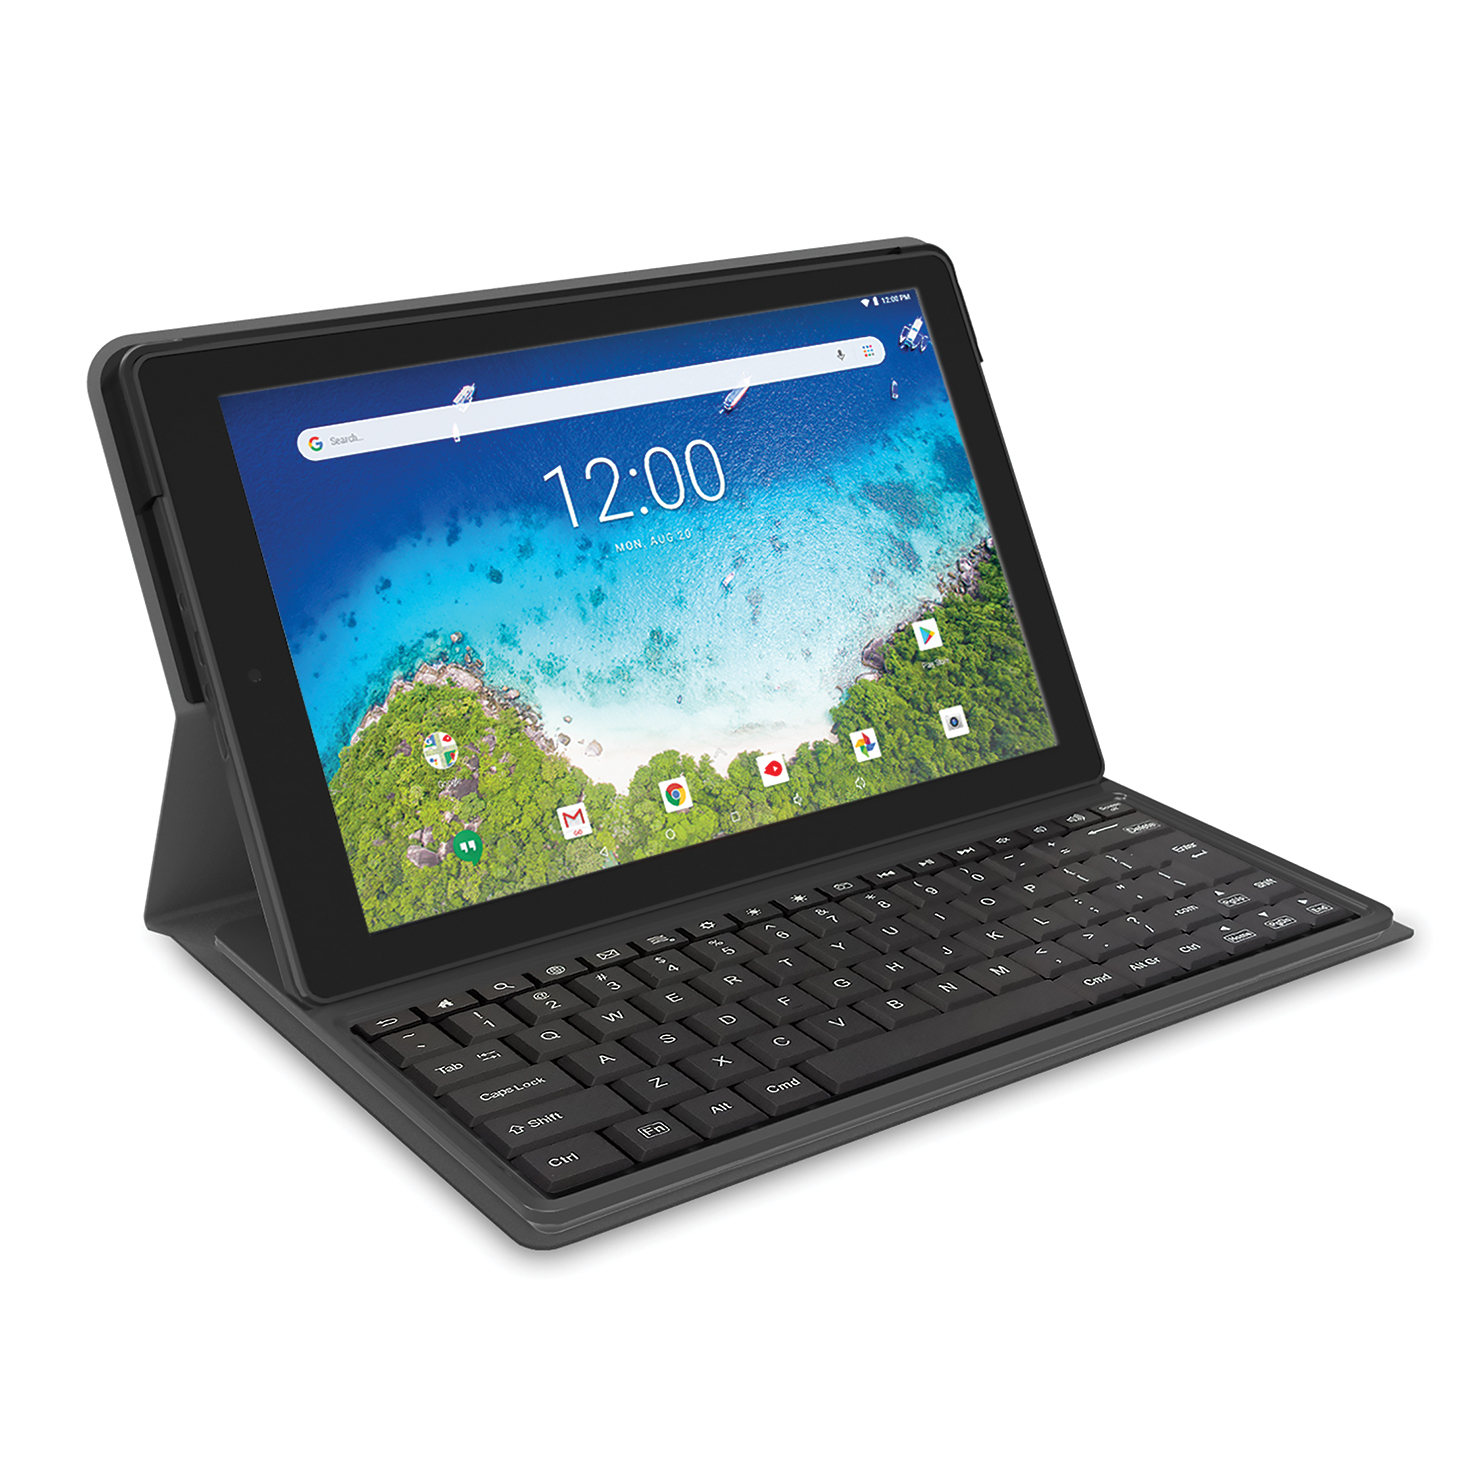 RCA Viking Pro 10.1" 2-in-1 Tablet with Folio Keyboard 32GB Android (8.1 Go Edition) - Charcoal - RCT6A03W13F1 C - image 1 of 8